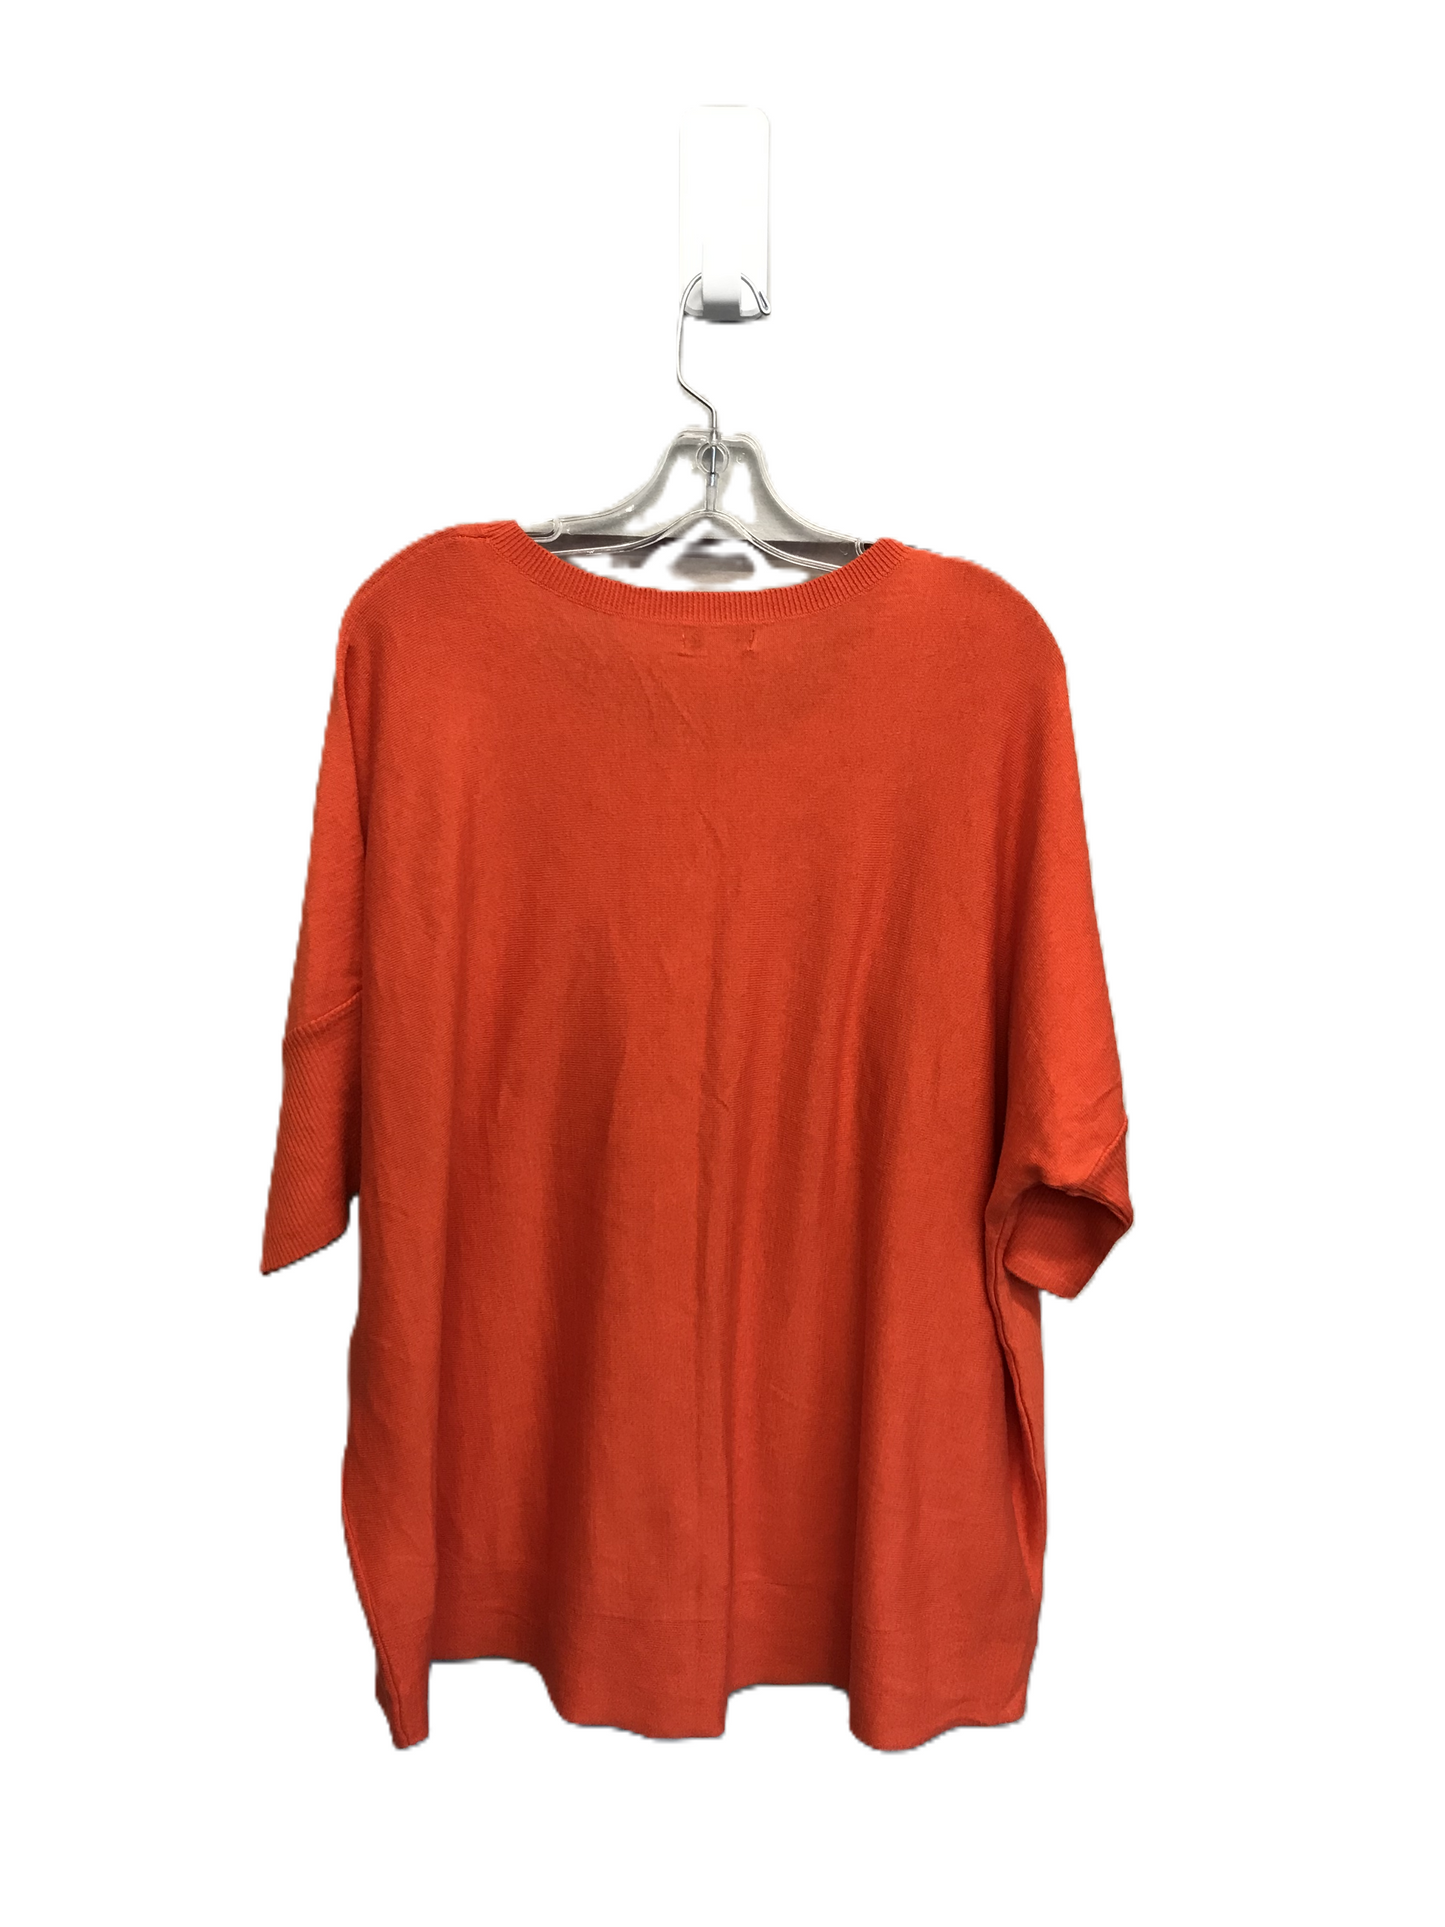 Orange Top Short Sleeve By Old Navy, Size: 1x